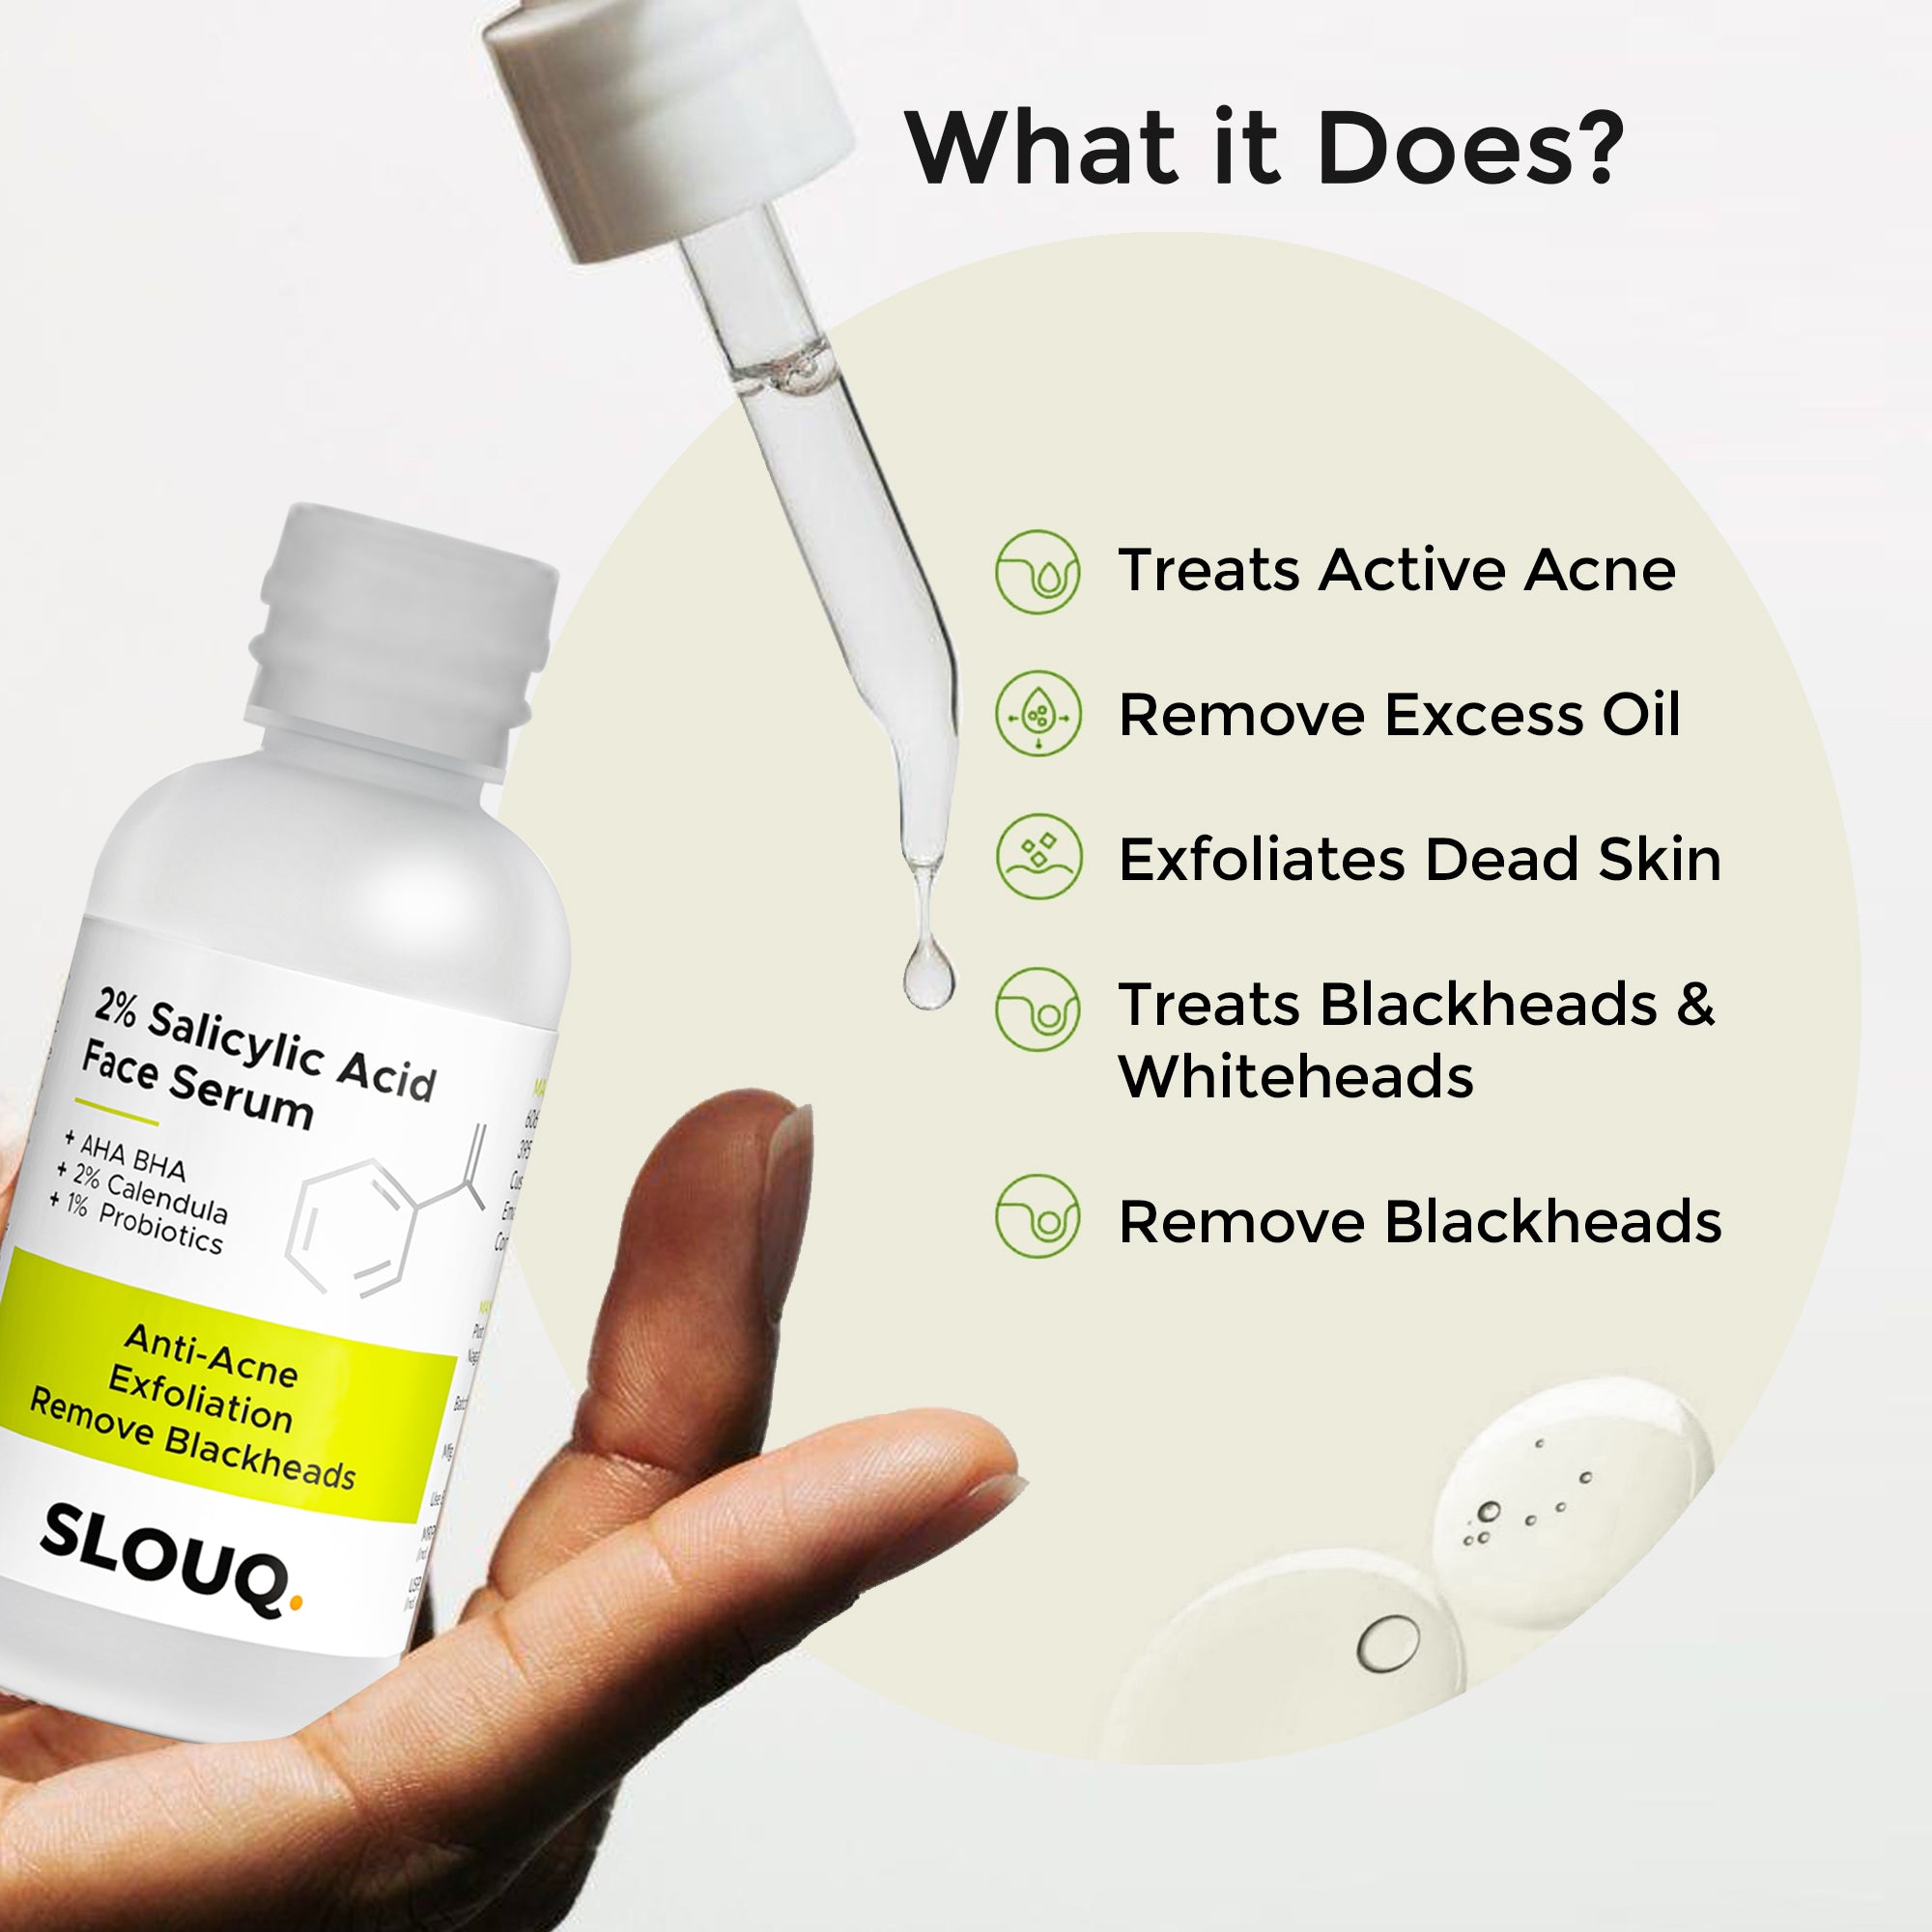 Slouq 2% Salicylic Acid Serum For Acne, Blackheads &amp; Open Pores - Reduces Excess Oil - Best for Acne Prone and Reduces Blemishes - 30ml